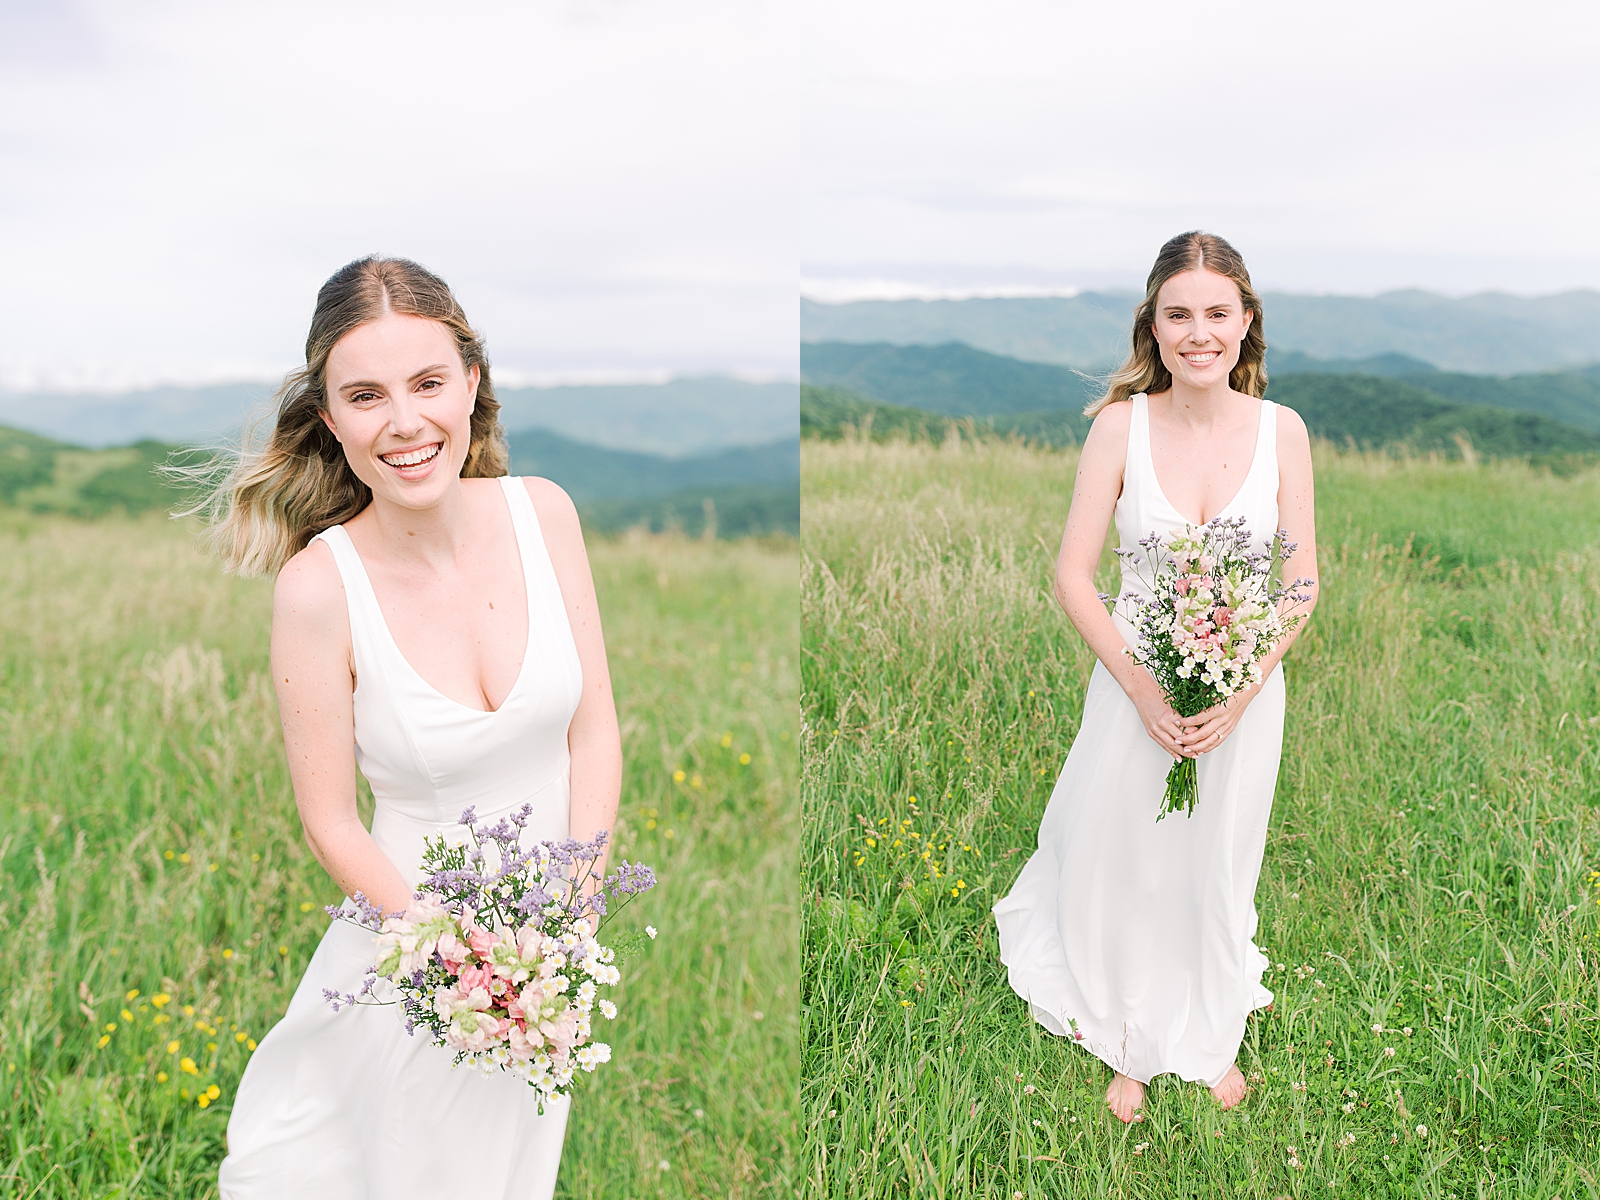 Max Patch Elopement Bride Smiling at the Camera Photos